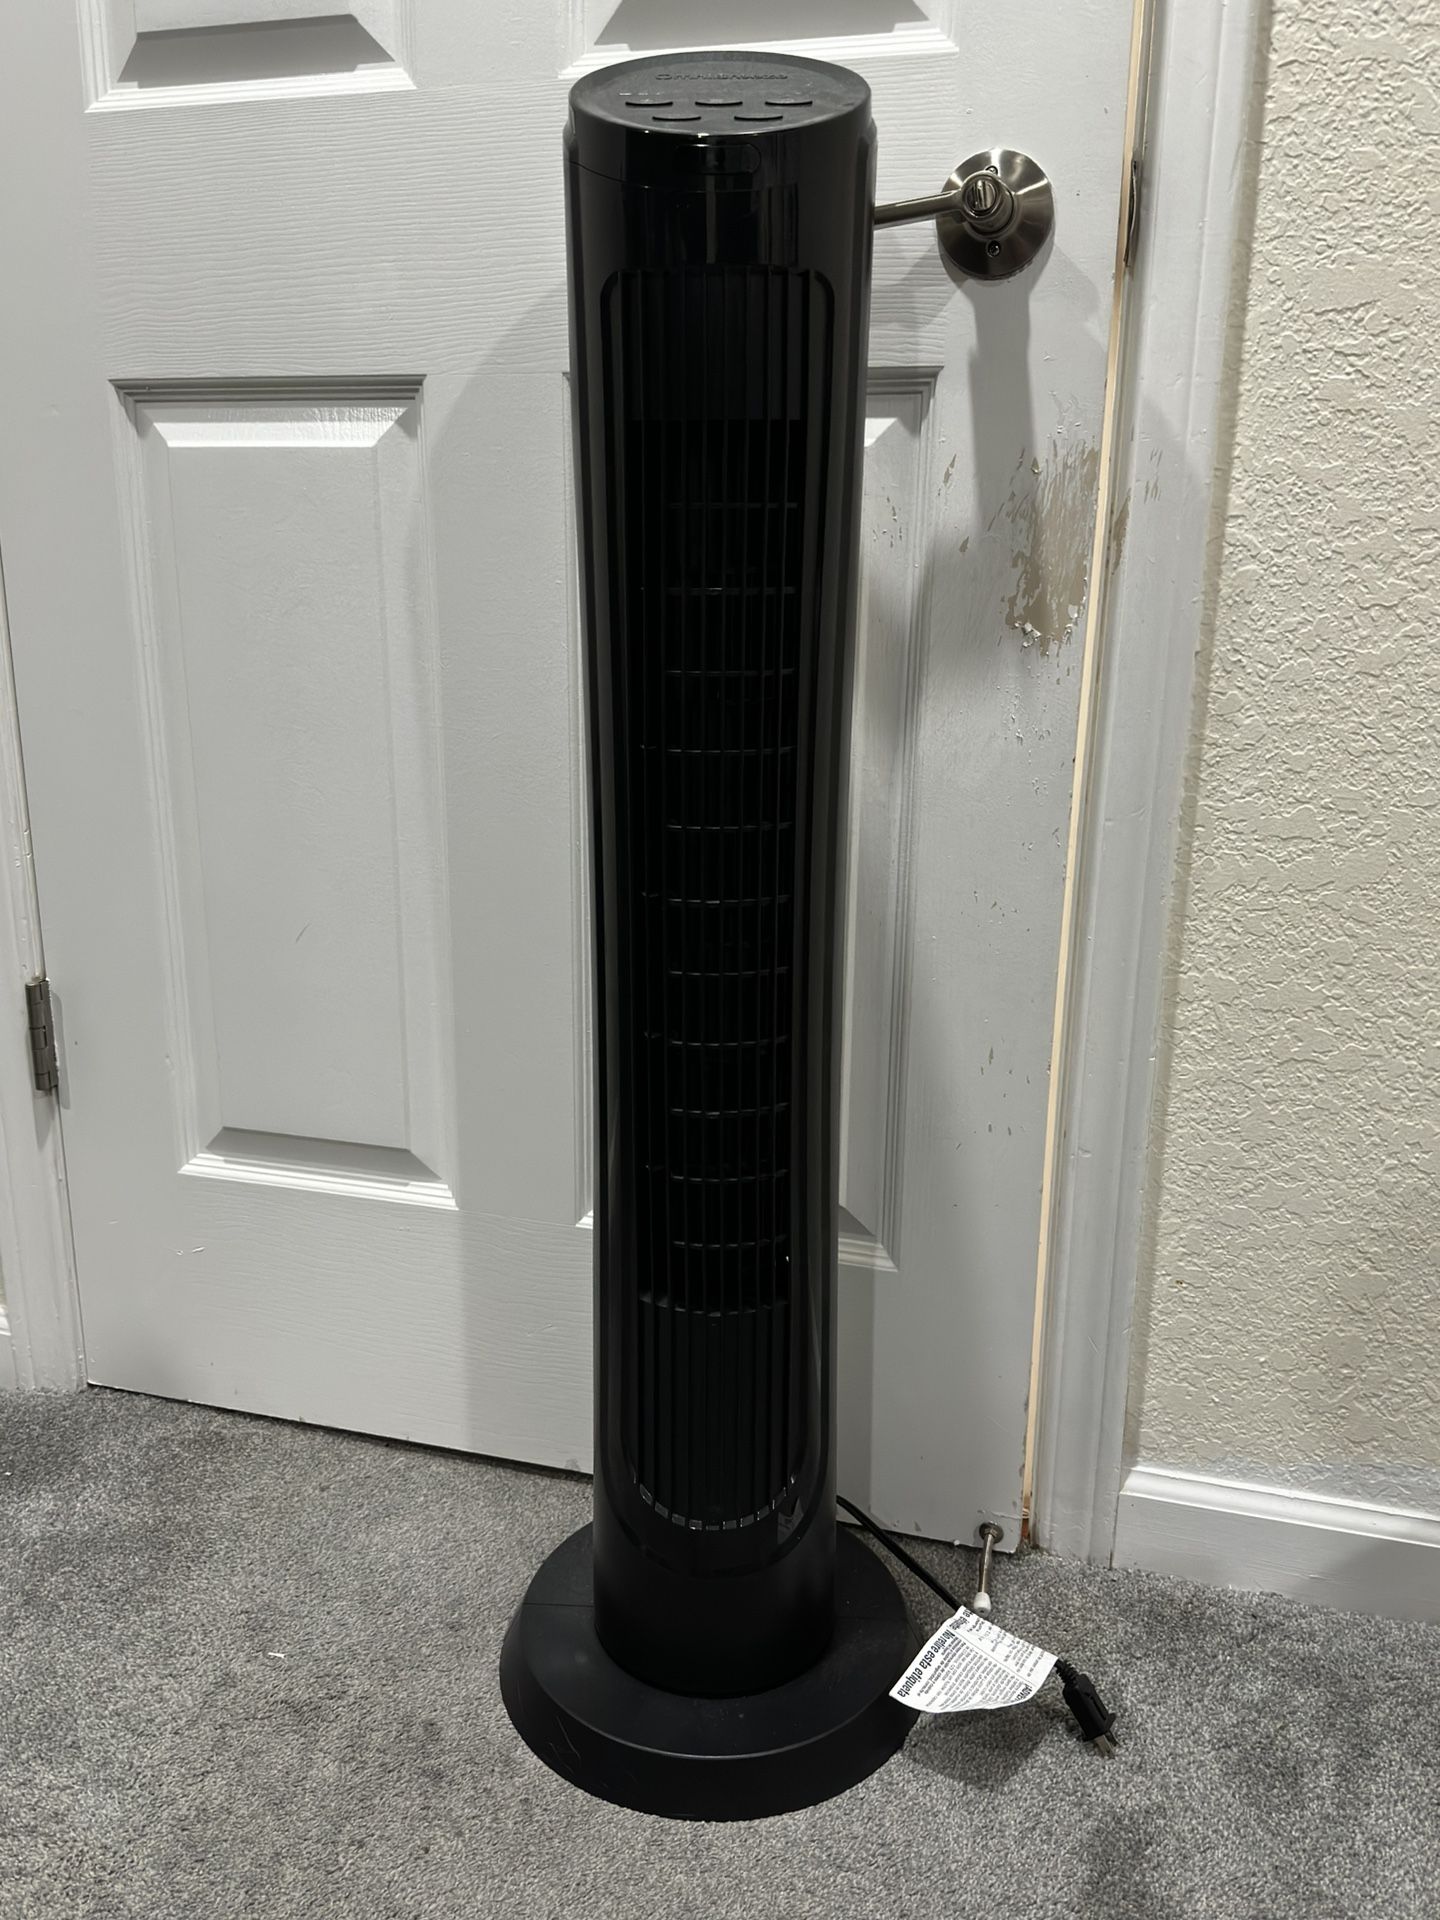 Sky-High Cooling: Black Tall Tower OmniBreeze Fan - Beat the Heat This Summer!